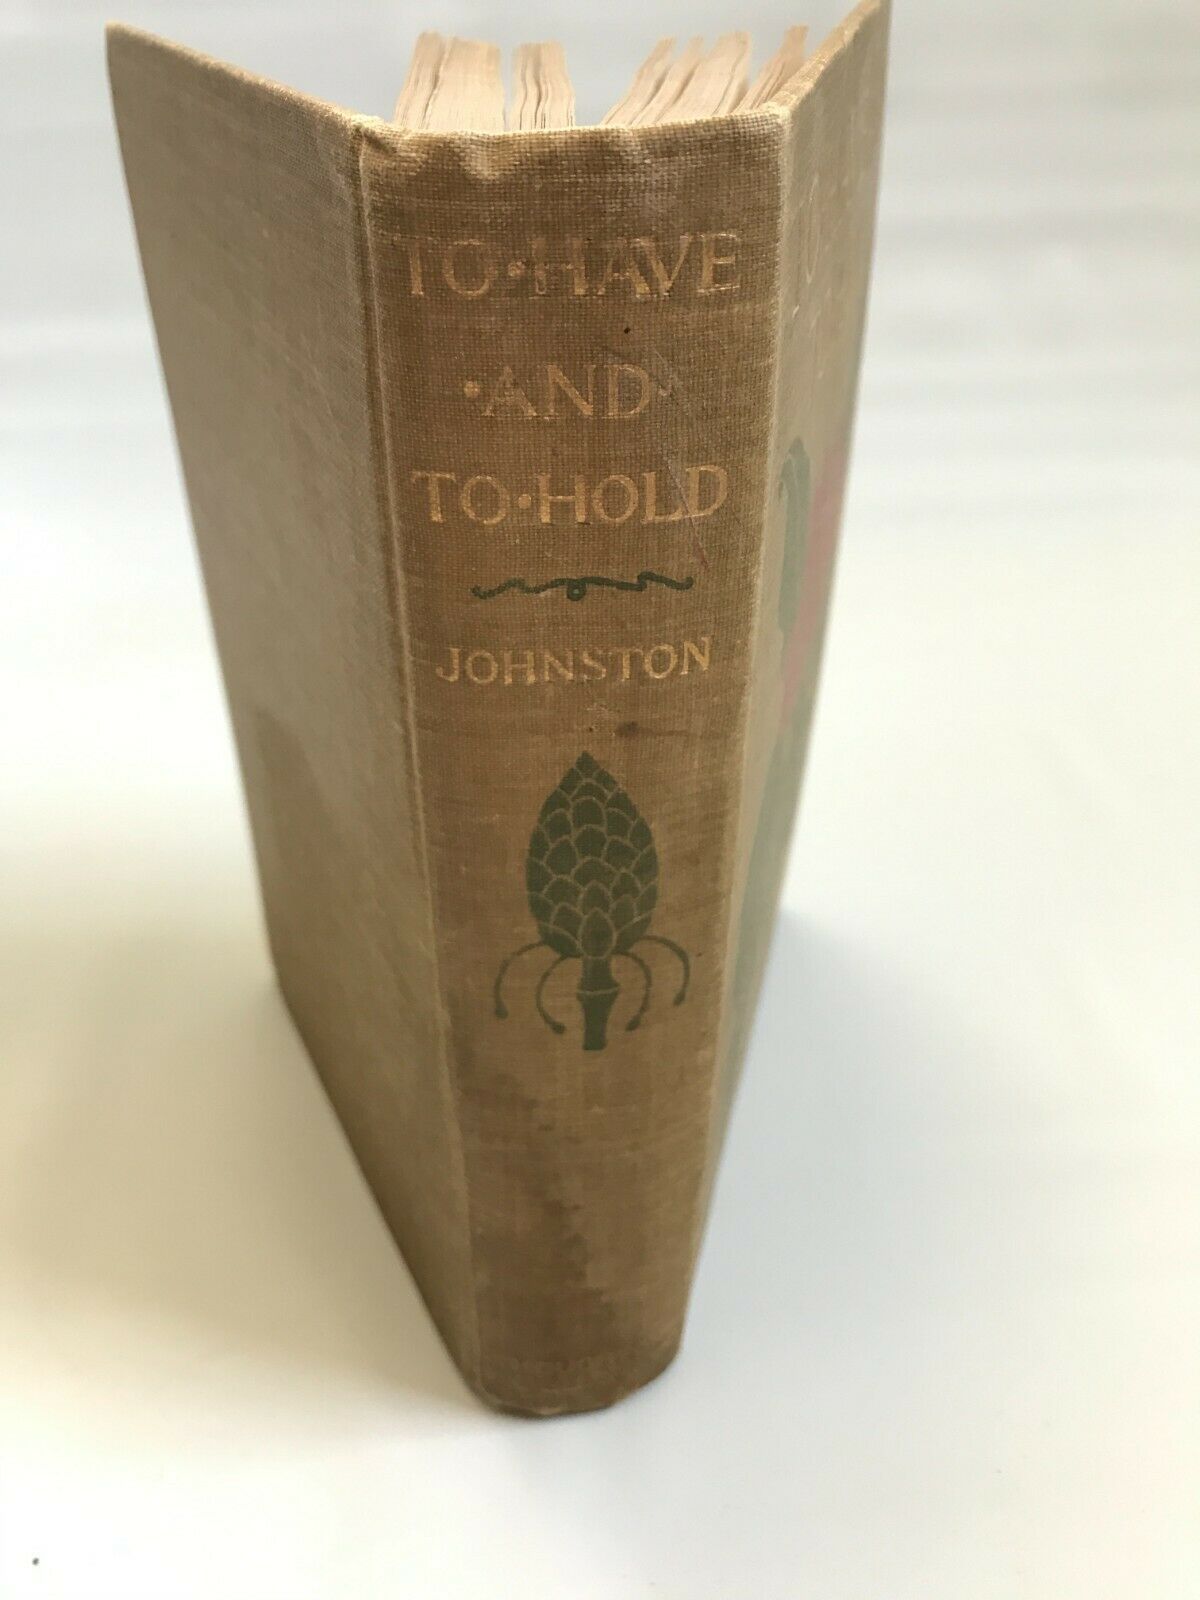 To Have and to Hold by Mary Johnston, 1900